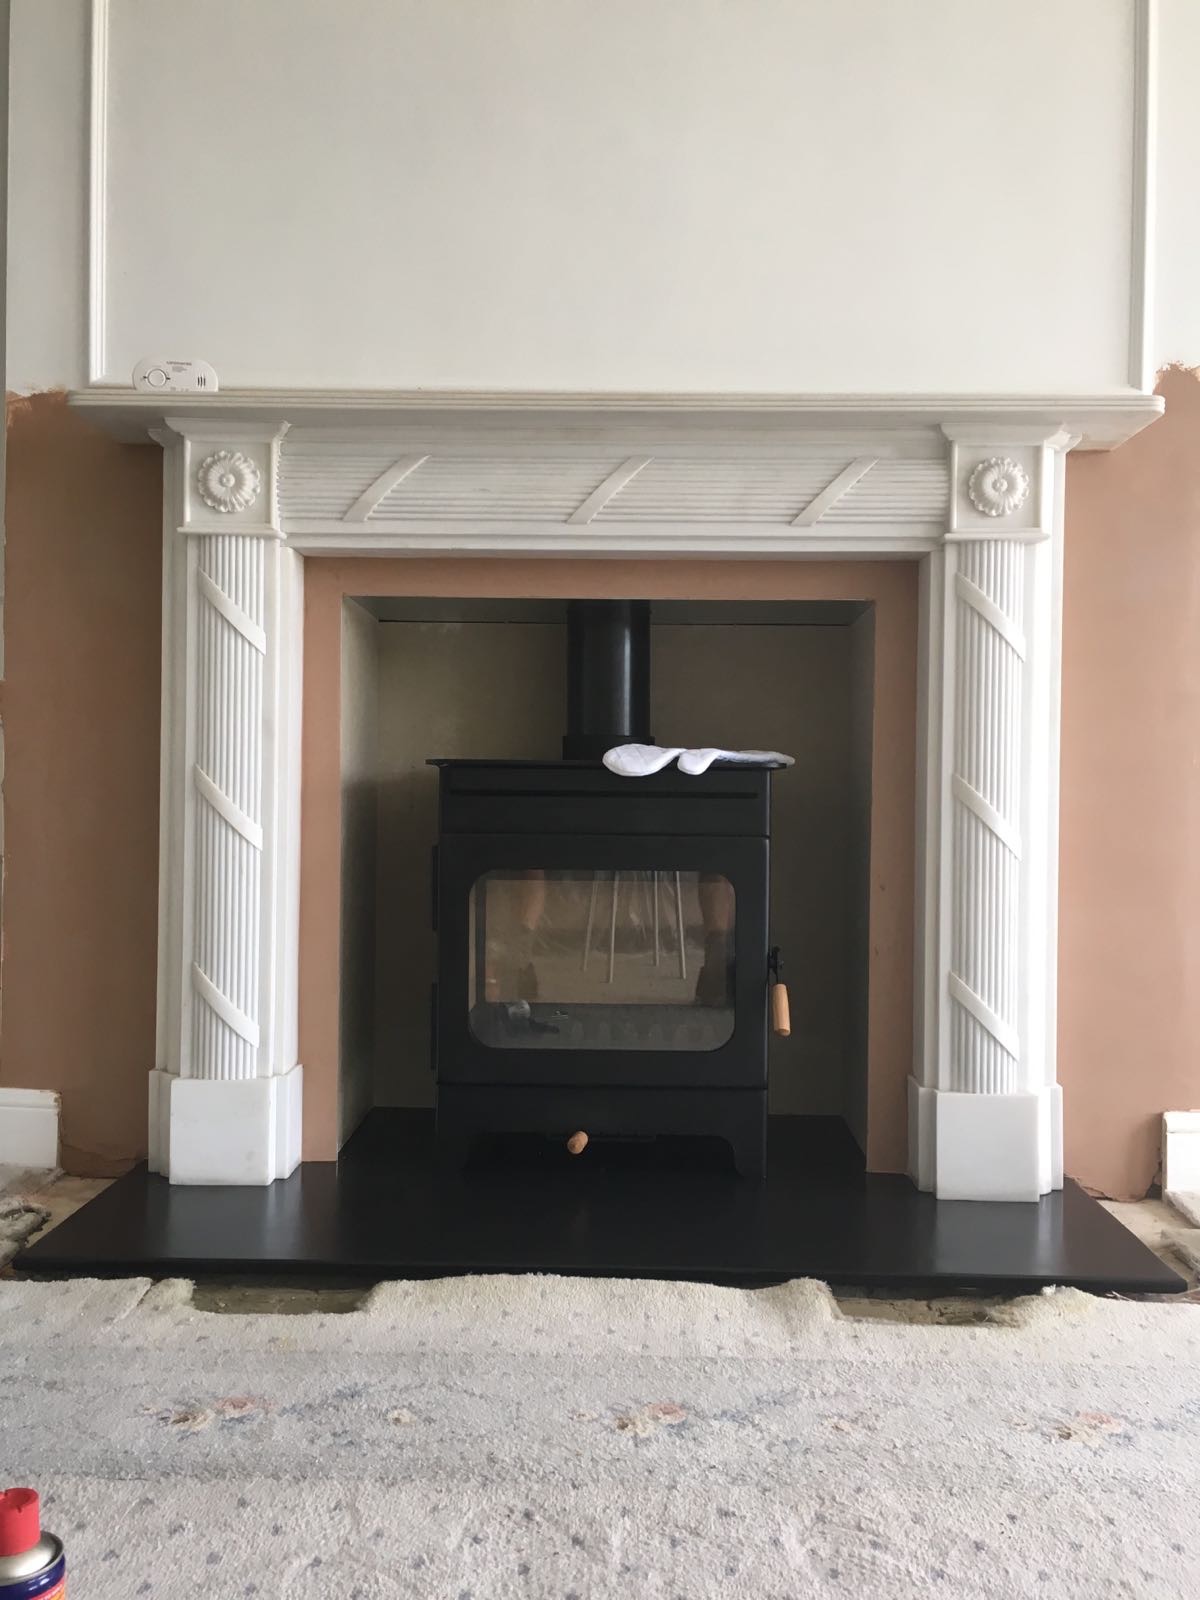 Full install with hearth stove & new fire surround